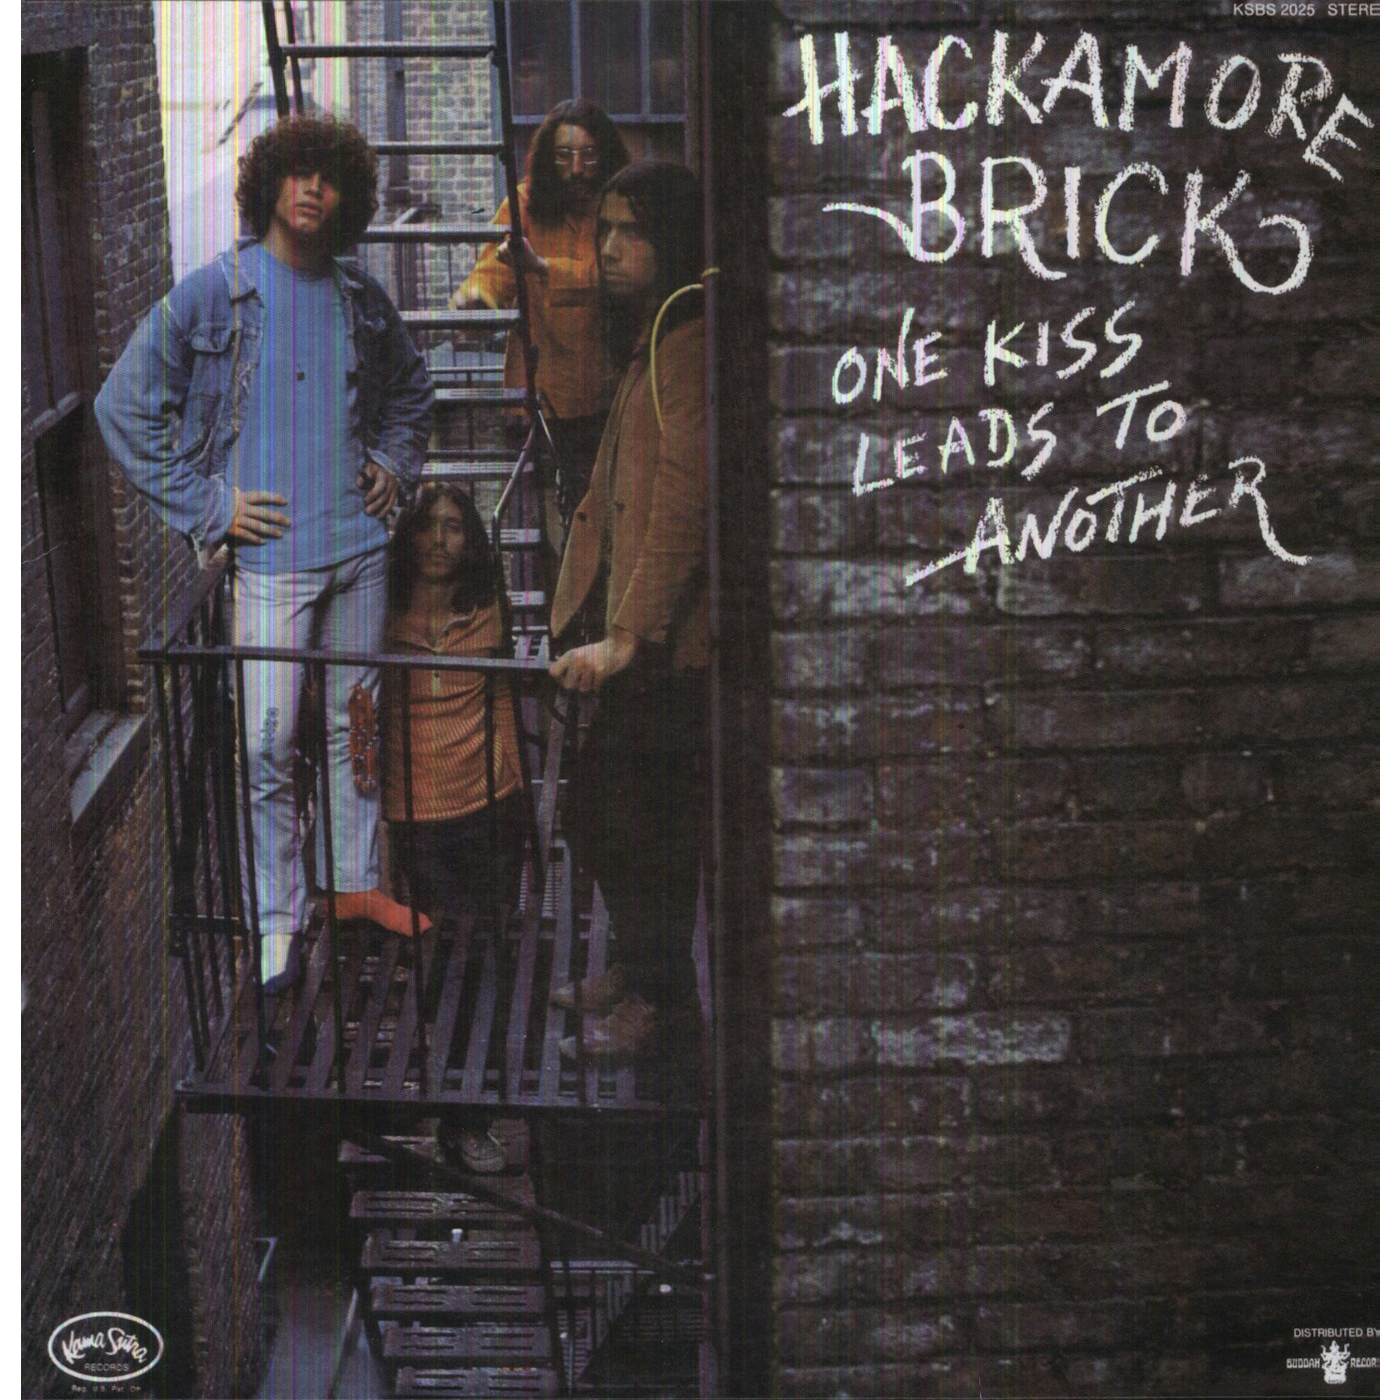 Hackamore Brick One Kiss Leads to Another Vinyl Record